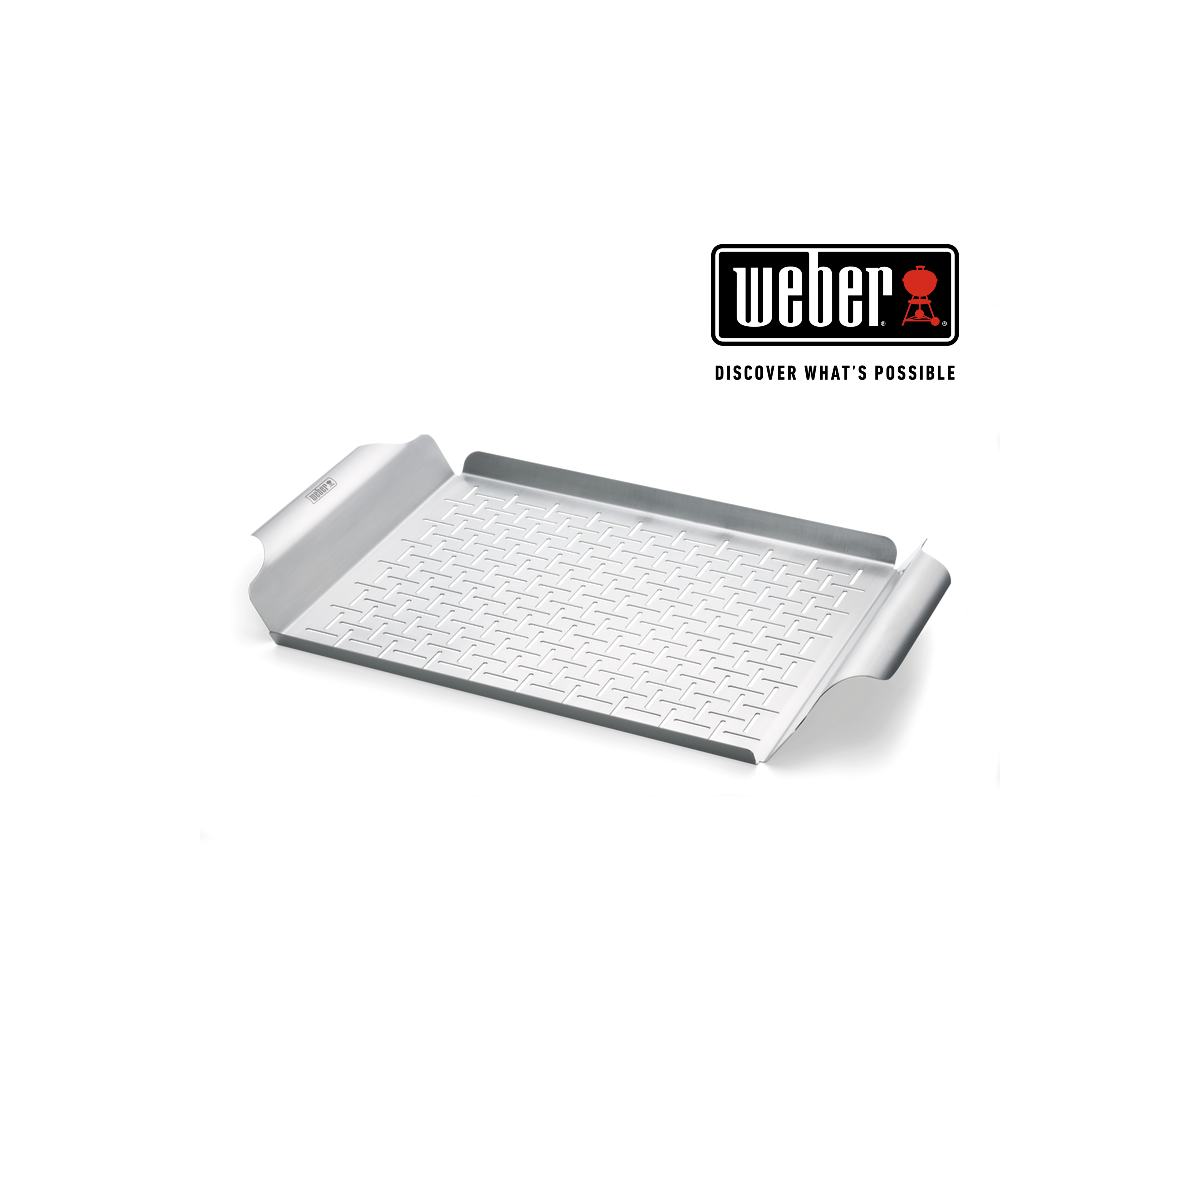 WEBER DELUXE GRILLING PAN - STAINLESS STEEL, RECTANGULAR AND DISHWASHER SAFE 30x44cm, 6434